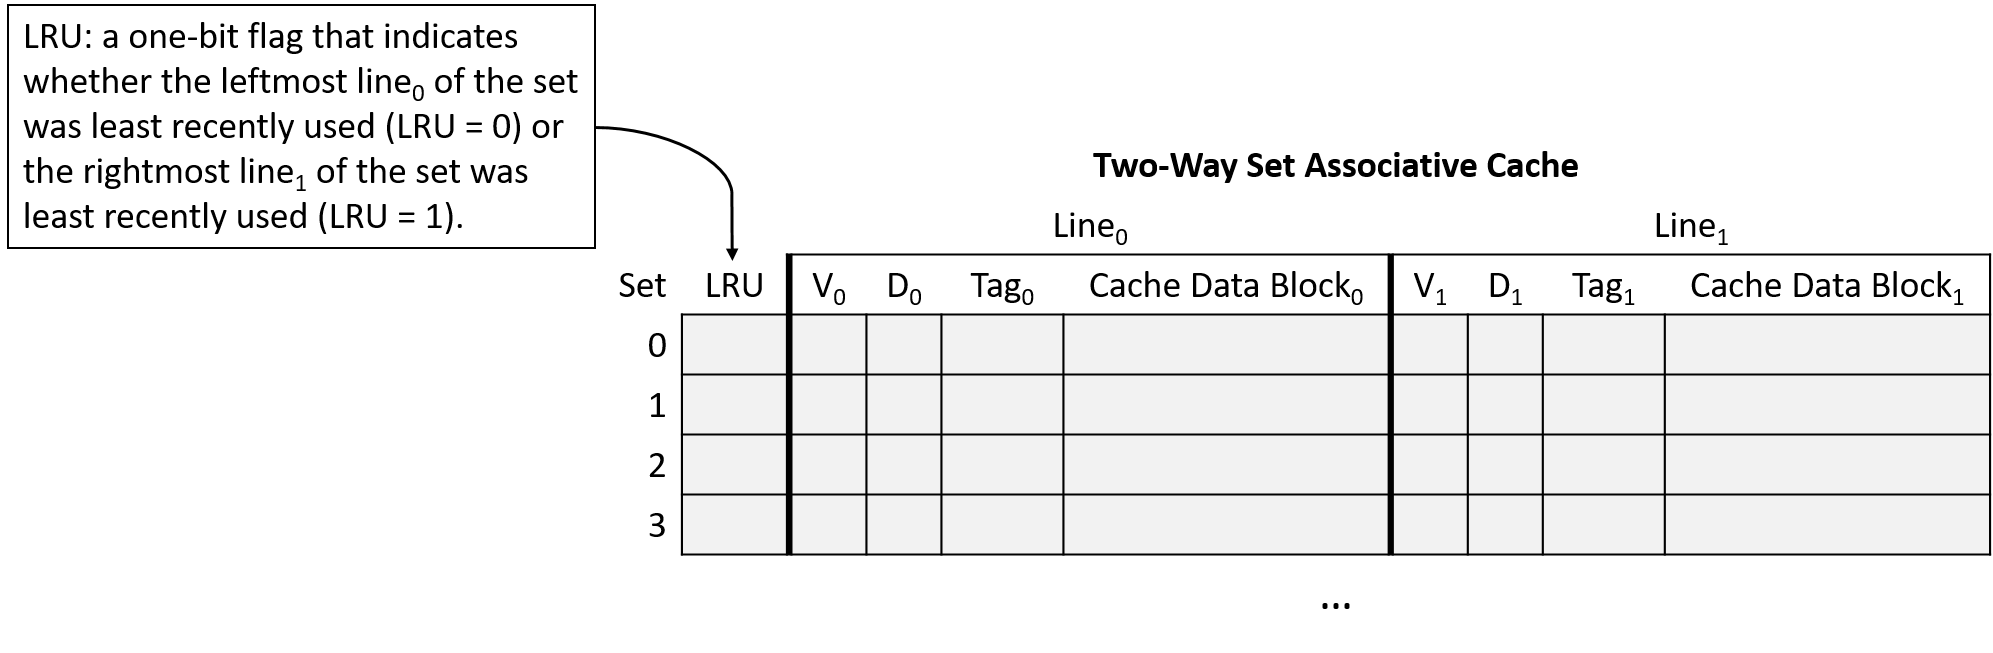 The LRU bit is a one-bit flag that indicates whether the leftmost line of the set was least recently used (LRU = 0) or the rightmost line of the set was least recently used (LRU = 1).